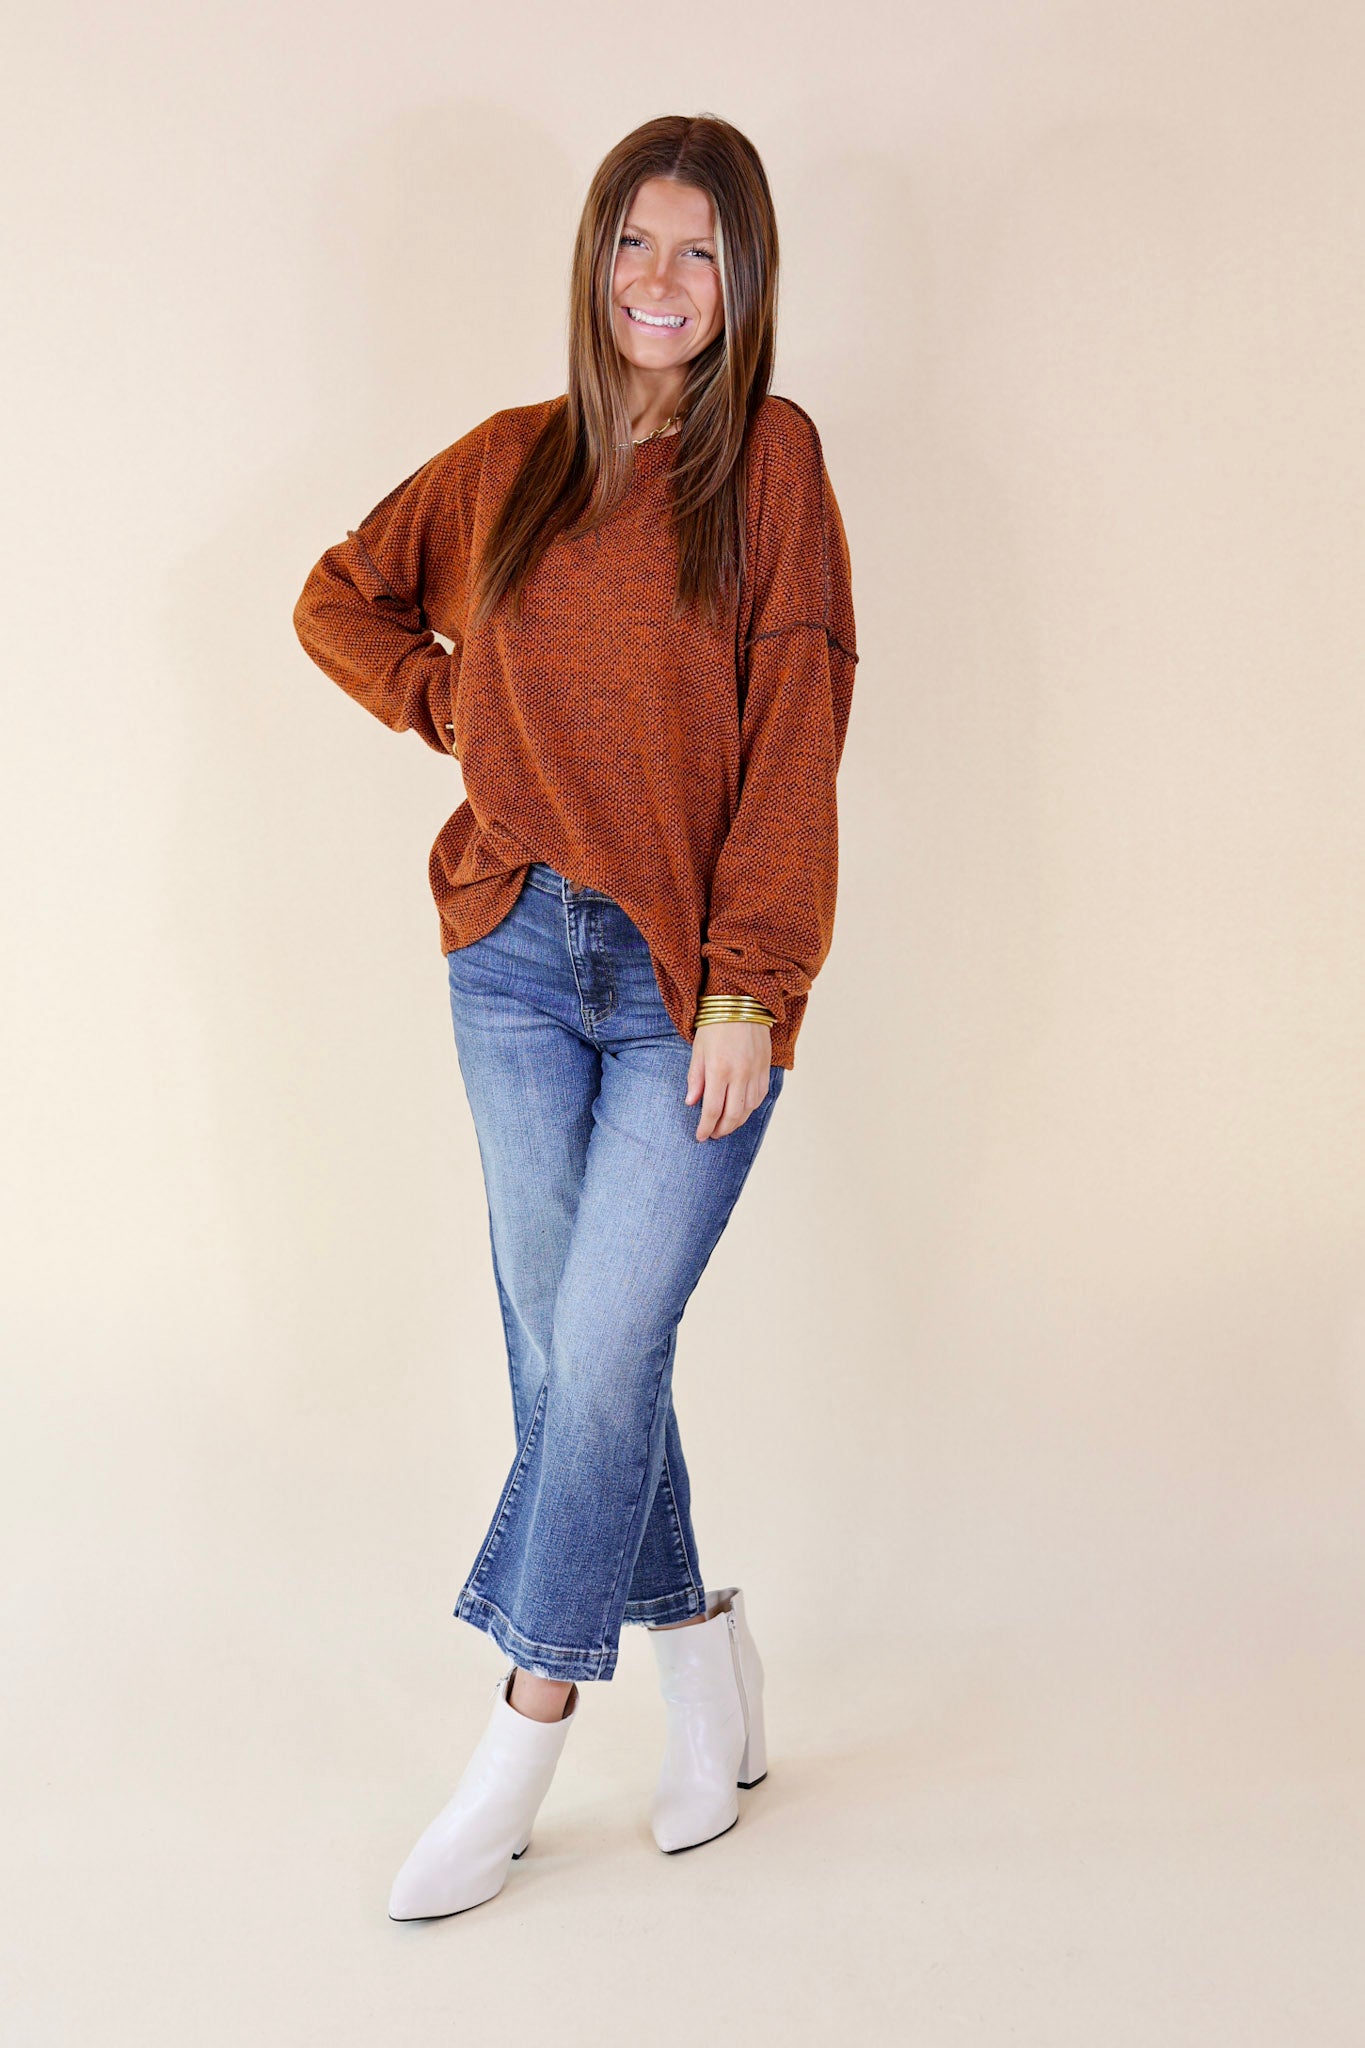 Fall Festival Long Sleeve Knit Top in Rust Orange - Giddy Up Glamour Boutique